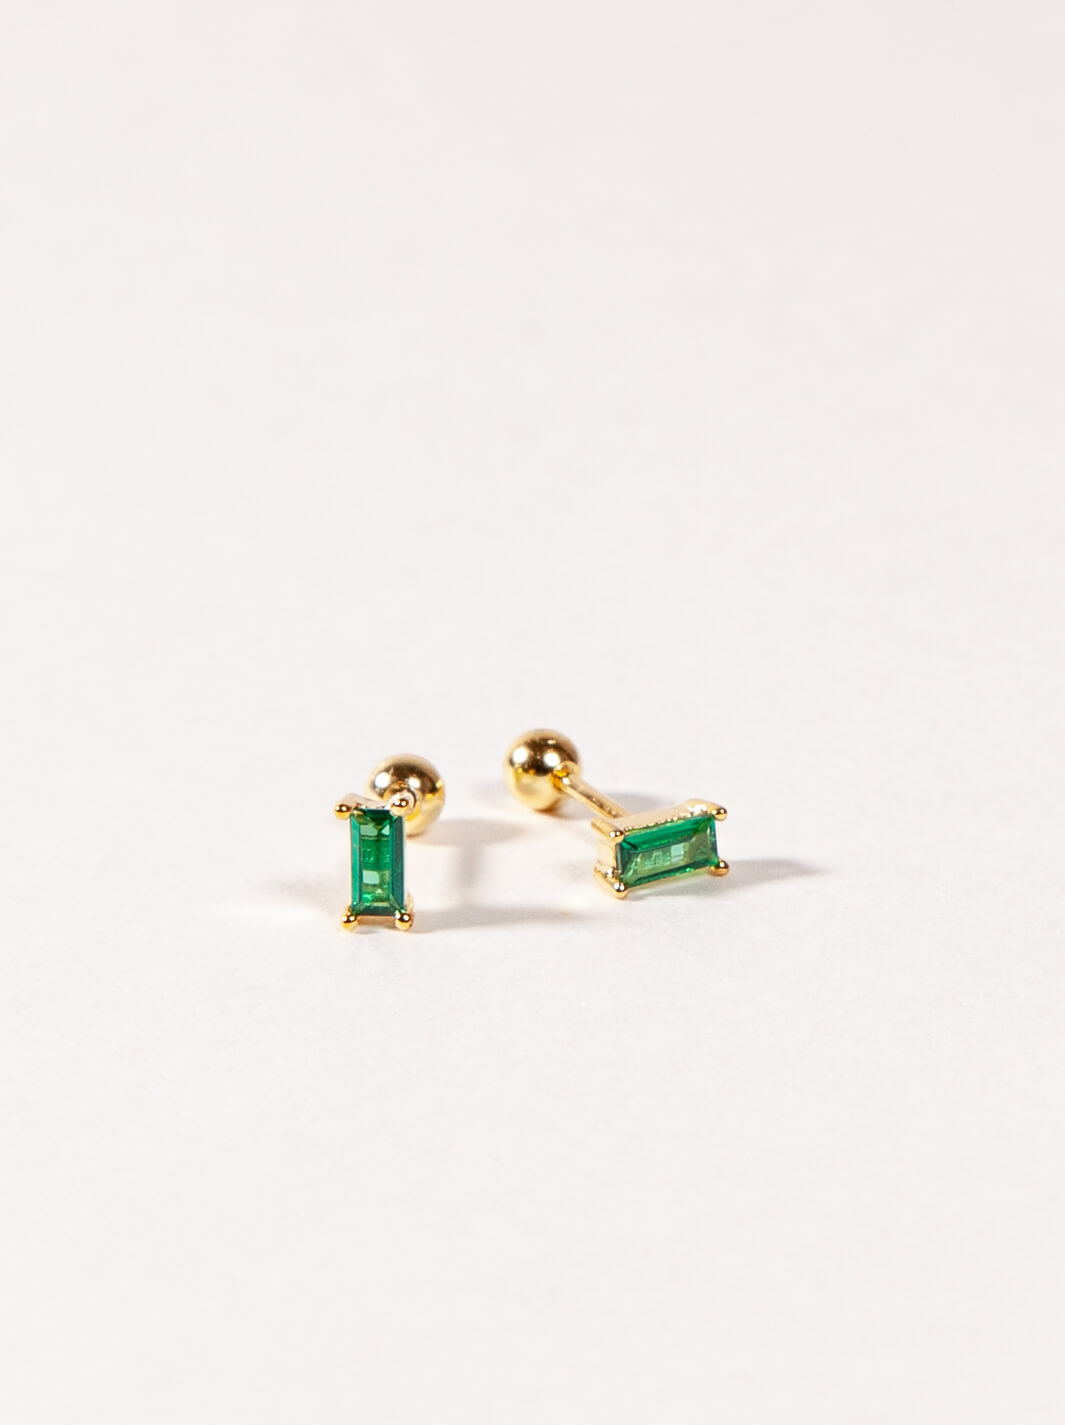 Emerald Baguette Studs with Ball Back